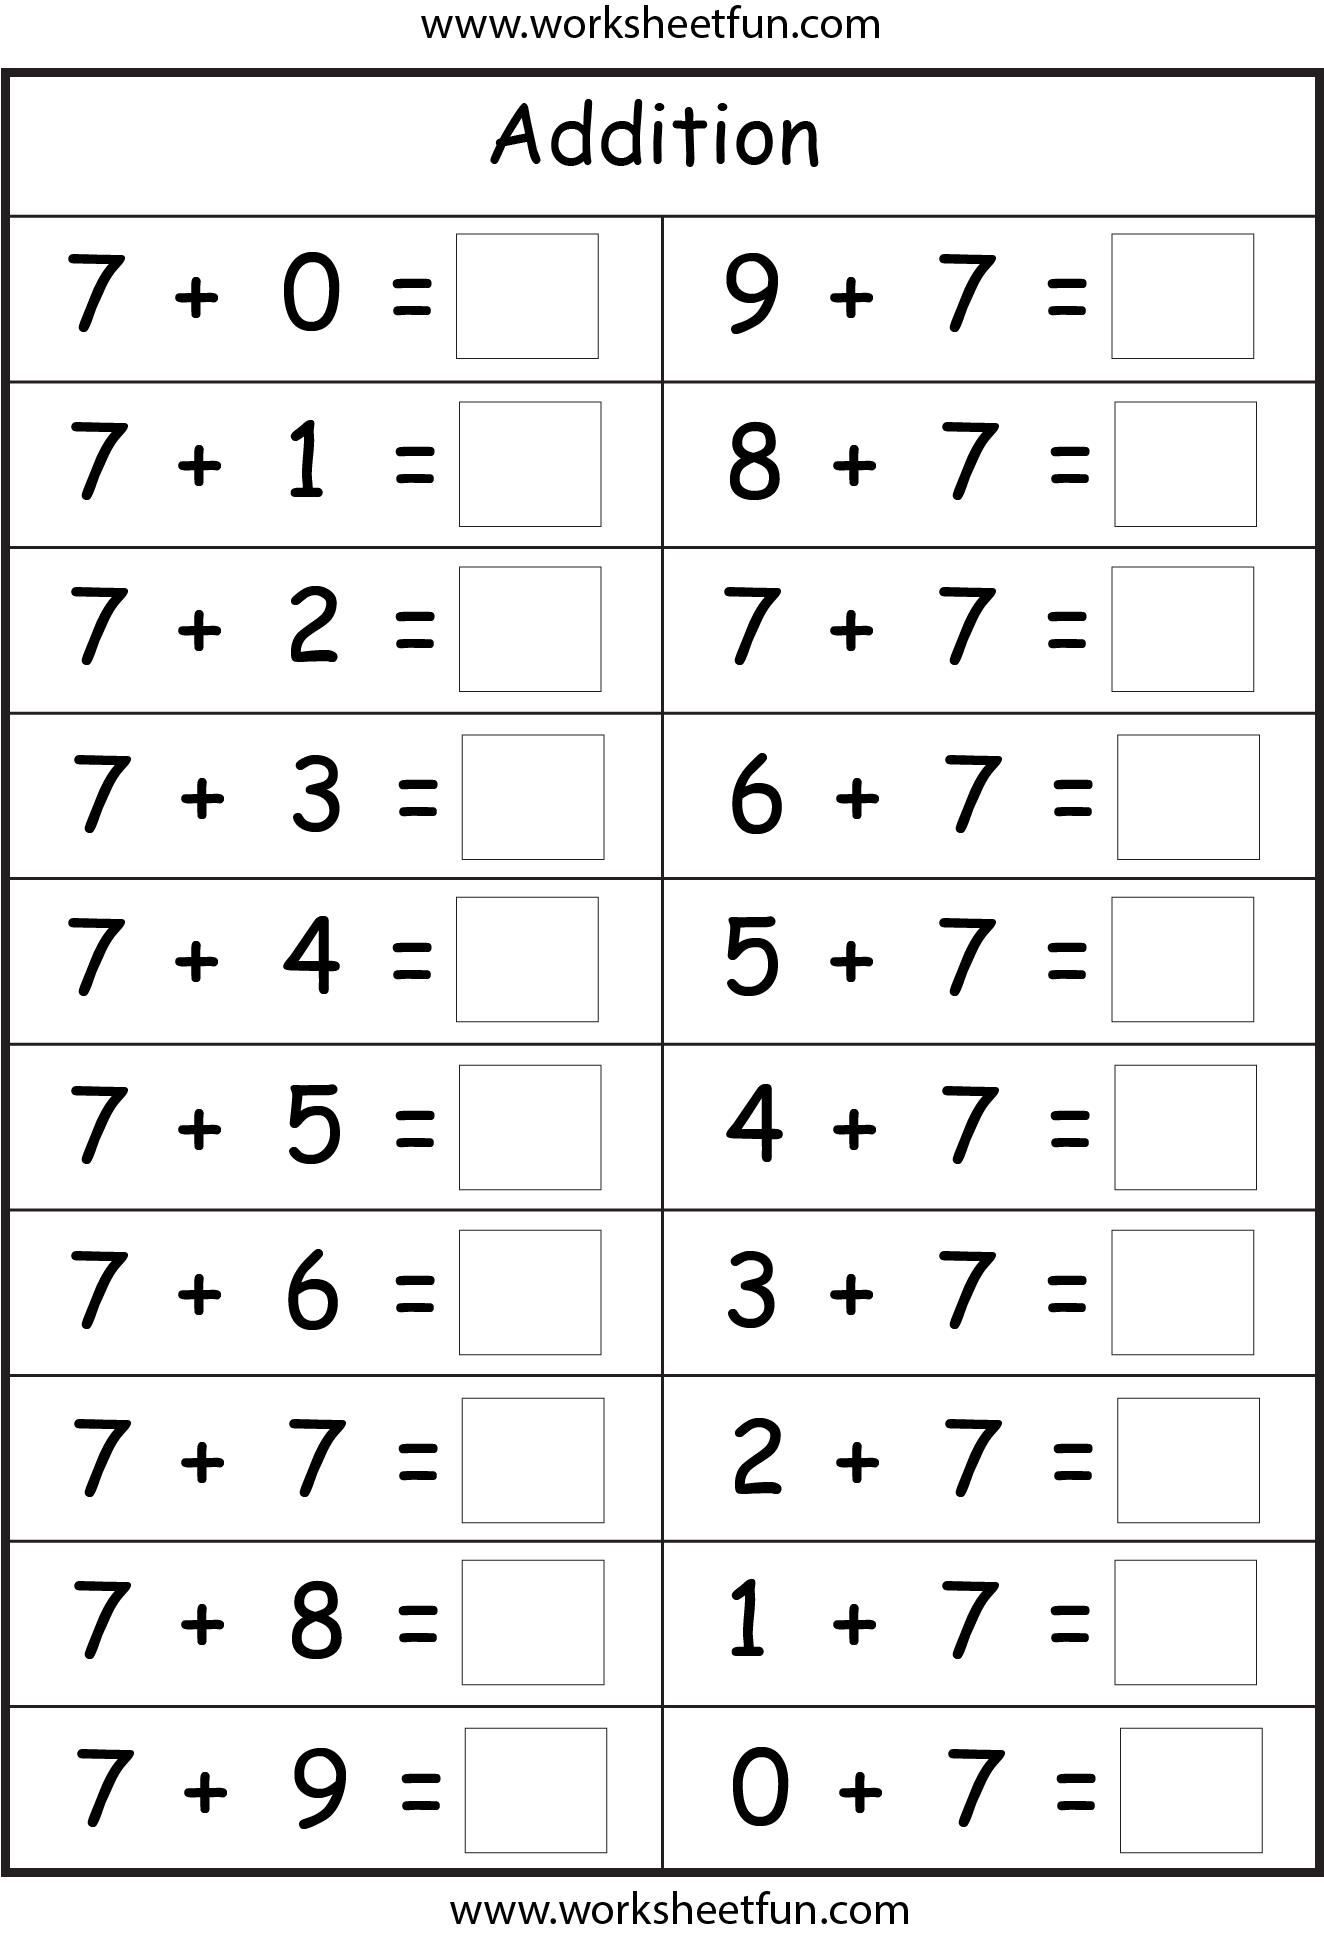 subtraction-facts-practice-worksheet-set-1-childrens-educational-workbooks-books-and-free